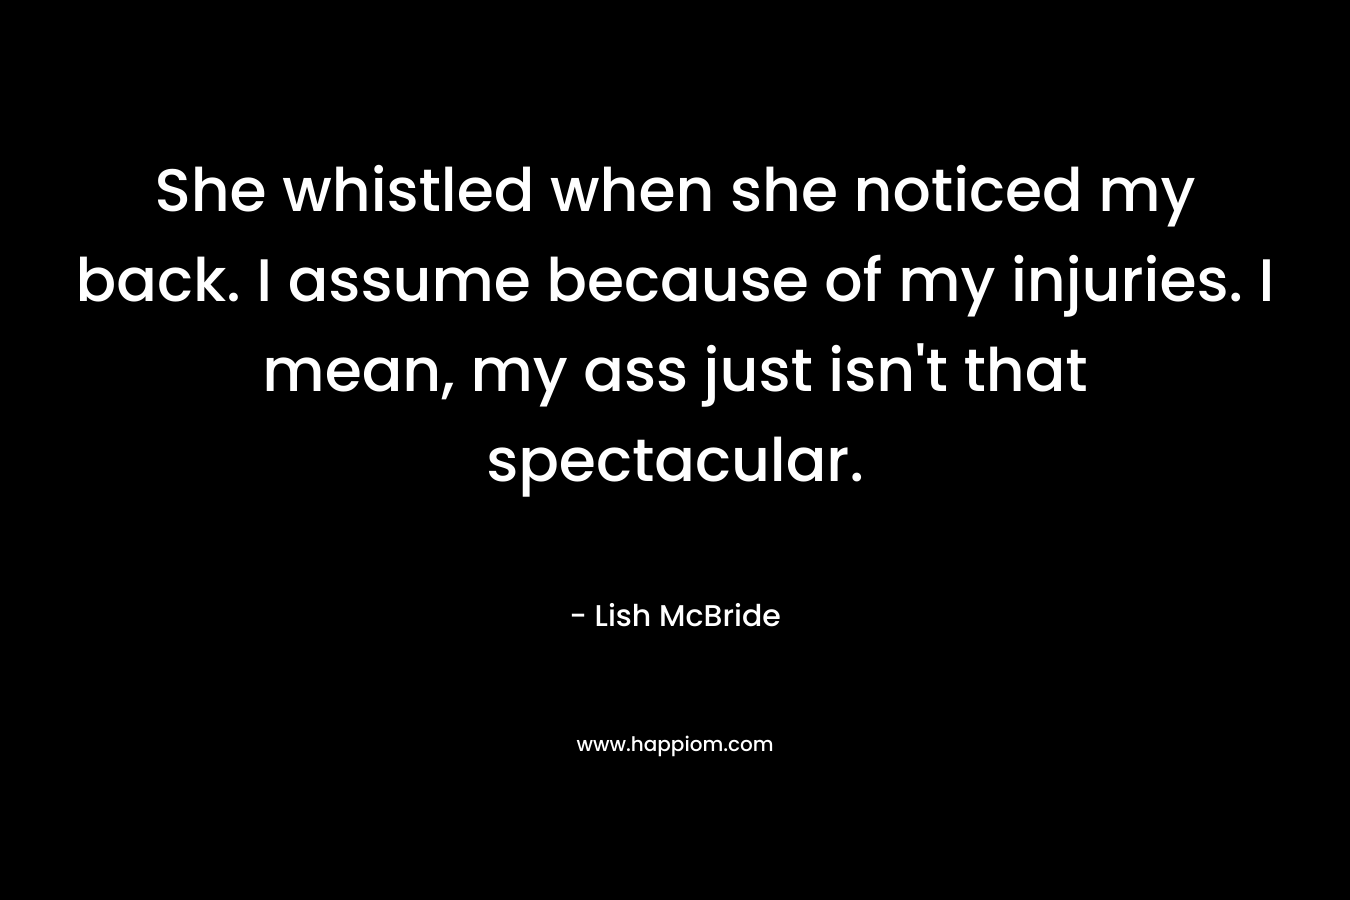 She whistled when she noticed my back. I assume because of my injuries. I mean, my ass just isn’t that spectacular. – Lish McBride